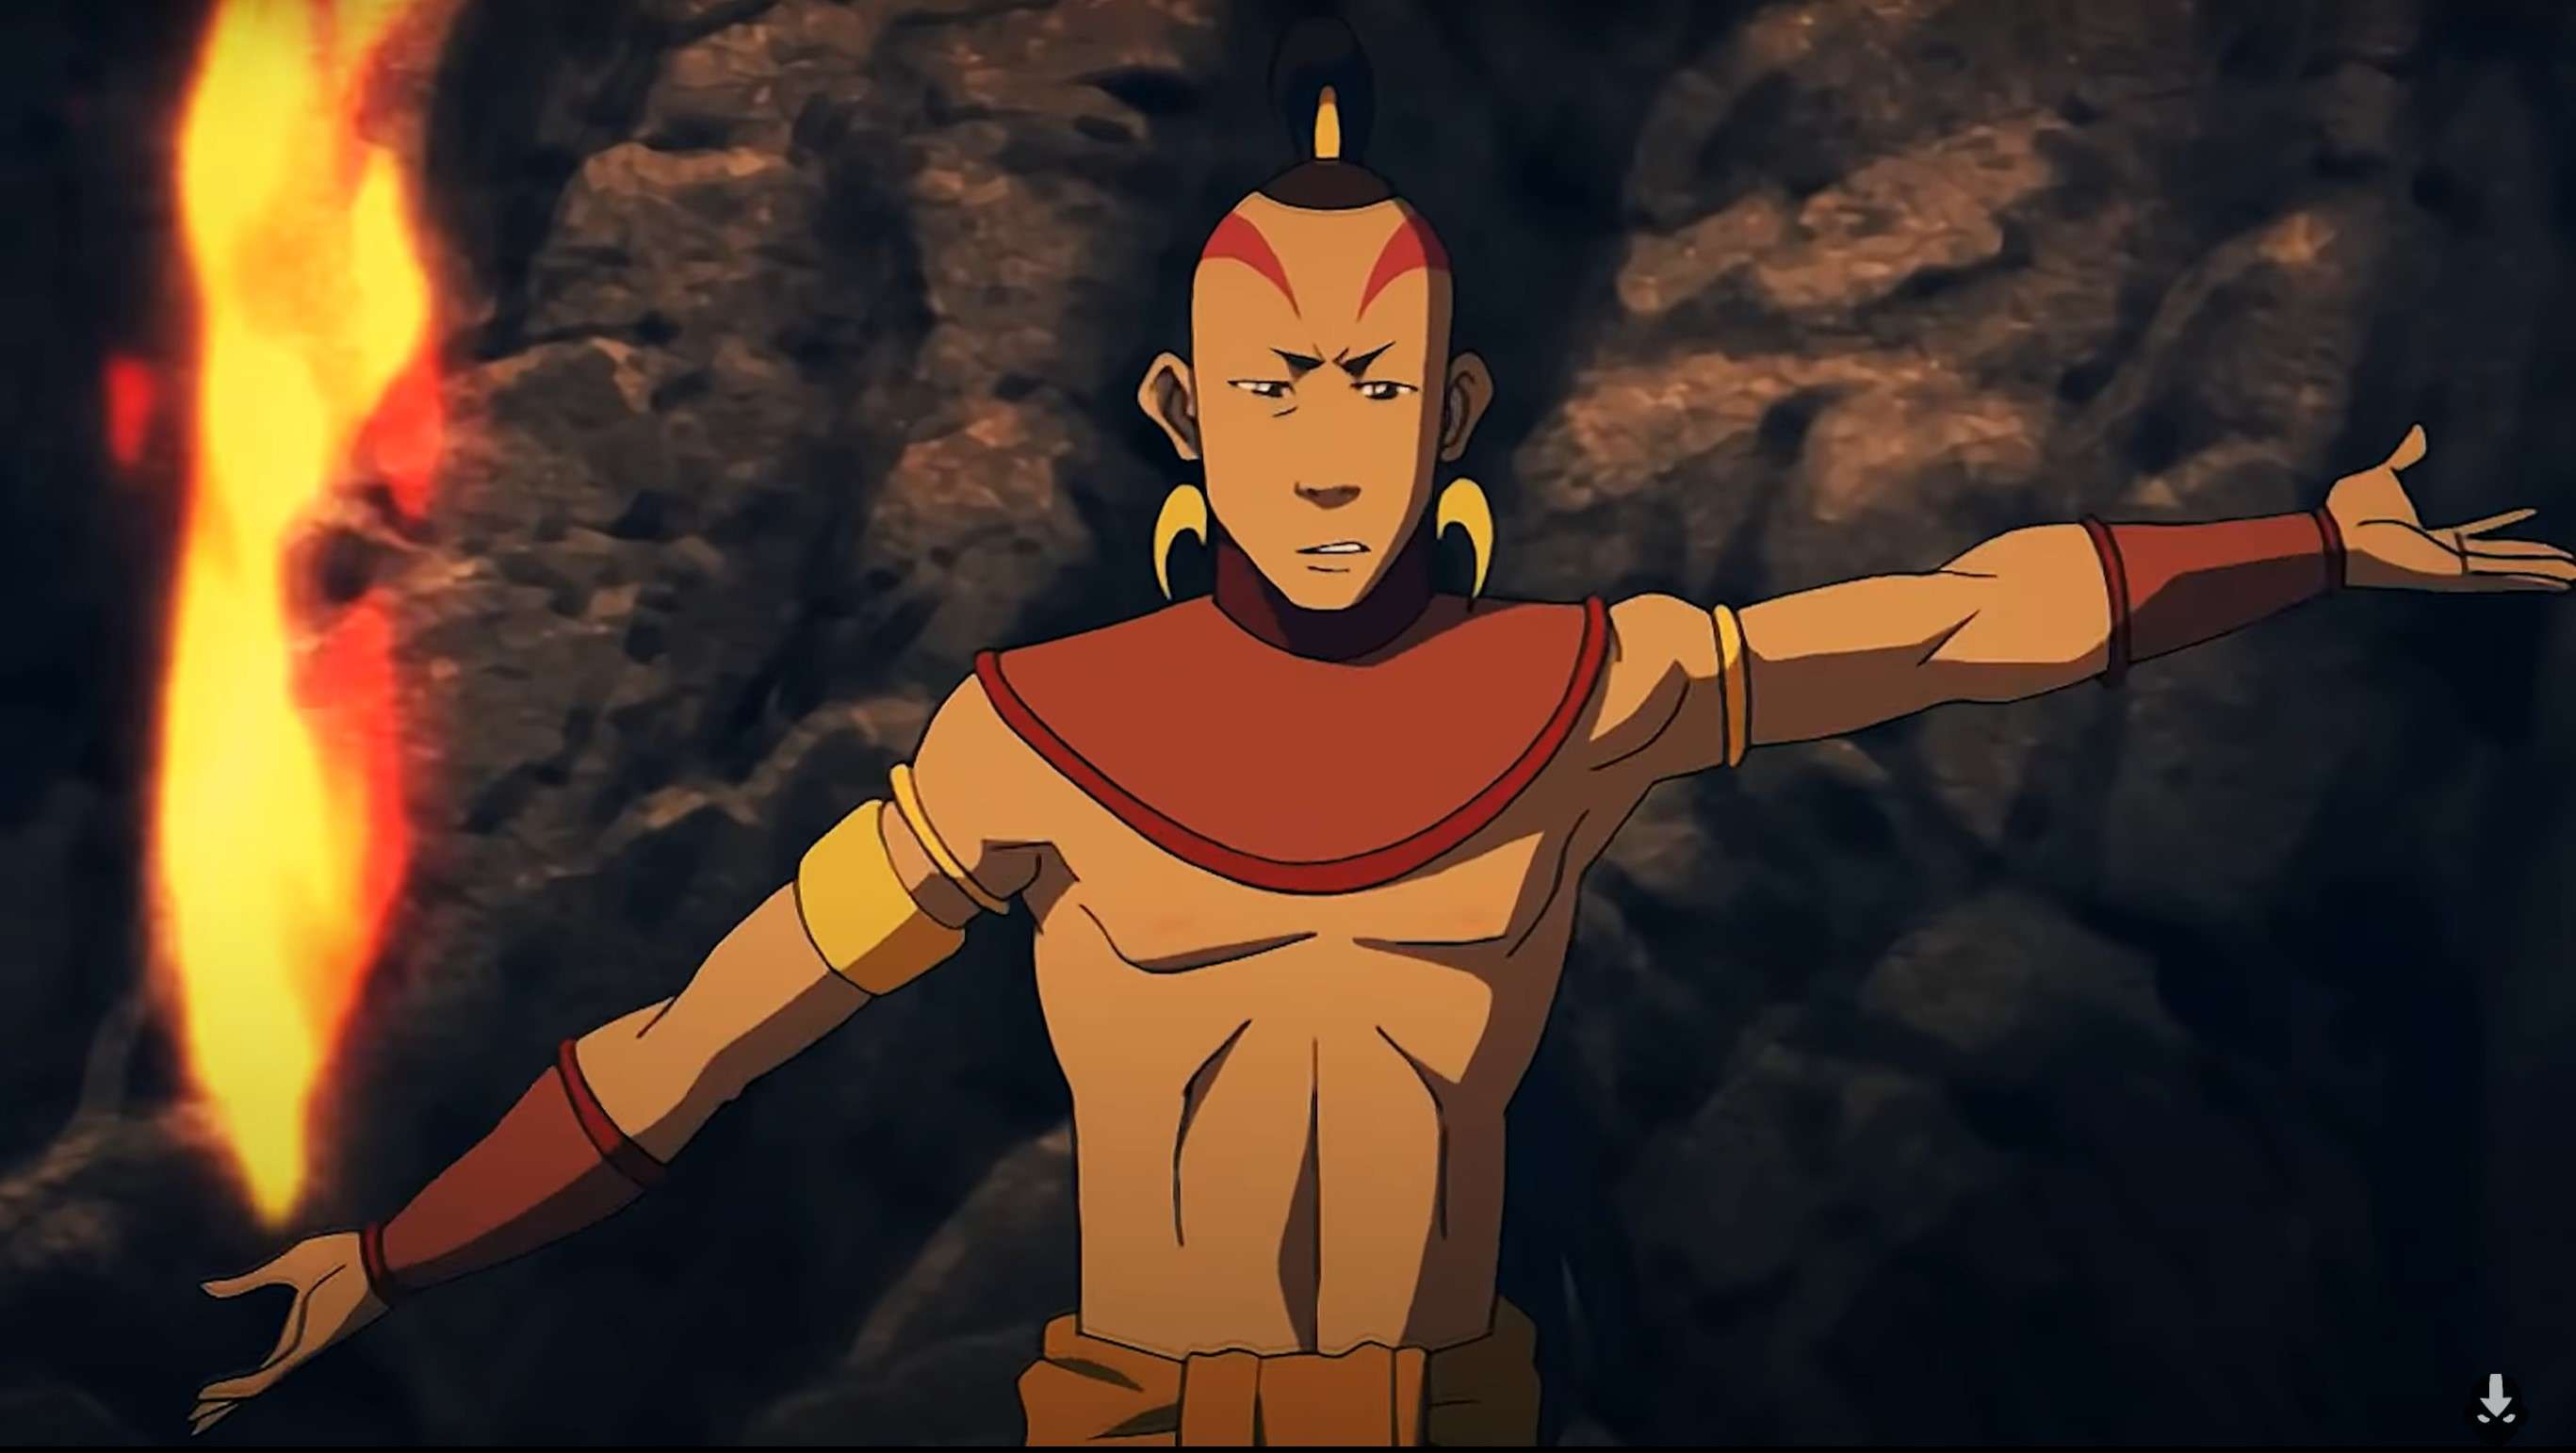 Avatar The Last Airbender Movie Gets Release Date From Paramount  Variety